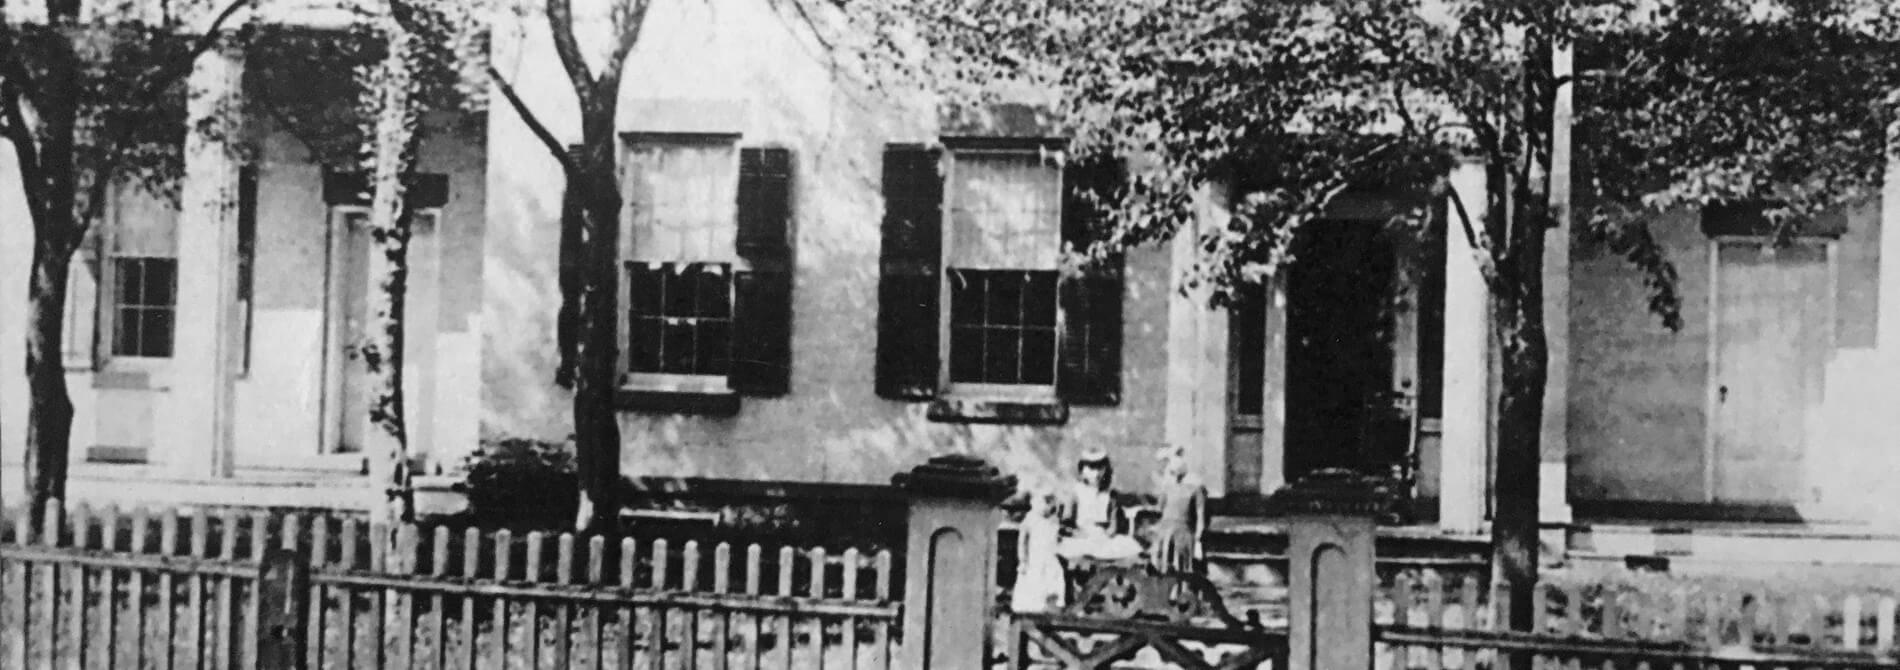 antique black and white photograph of munro house in the 1800s surrounded by a picket fence